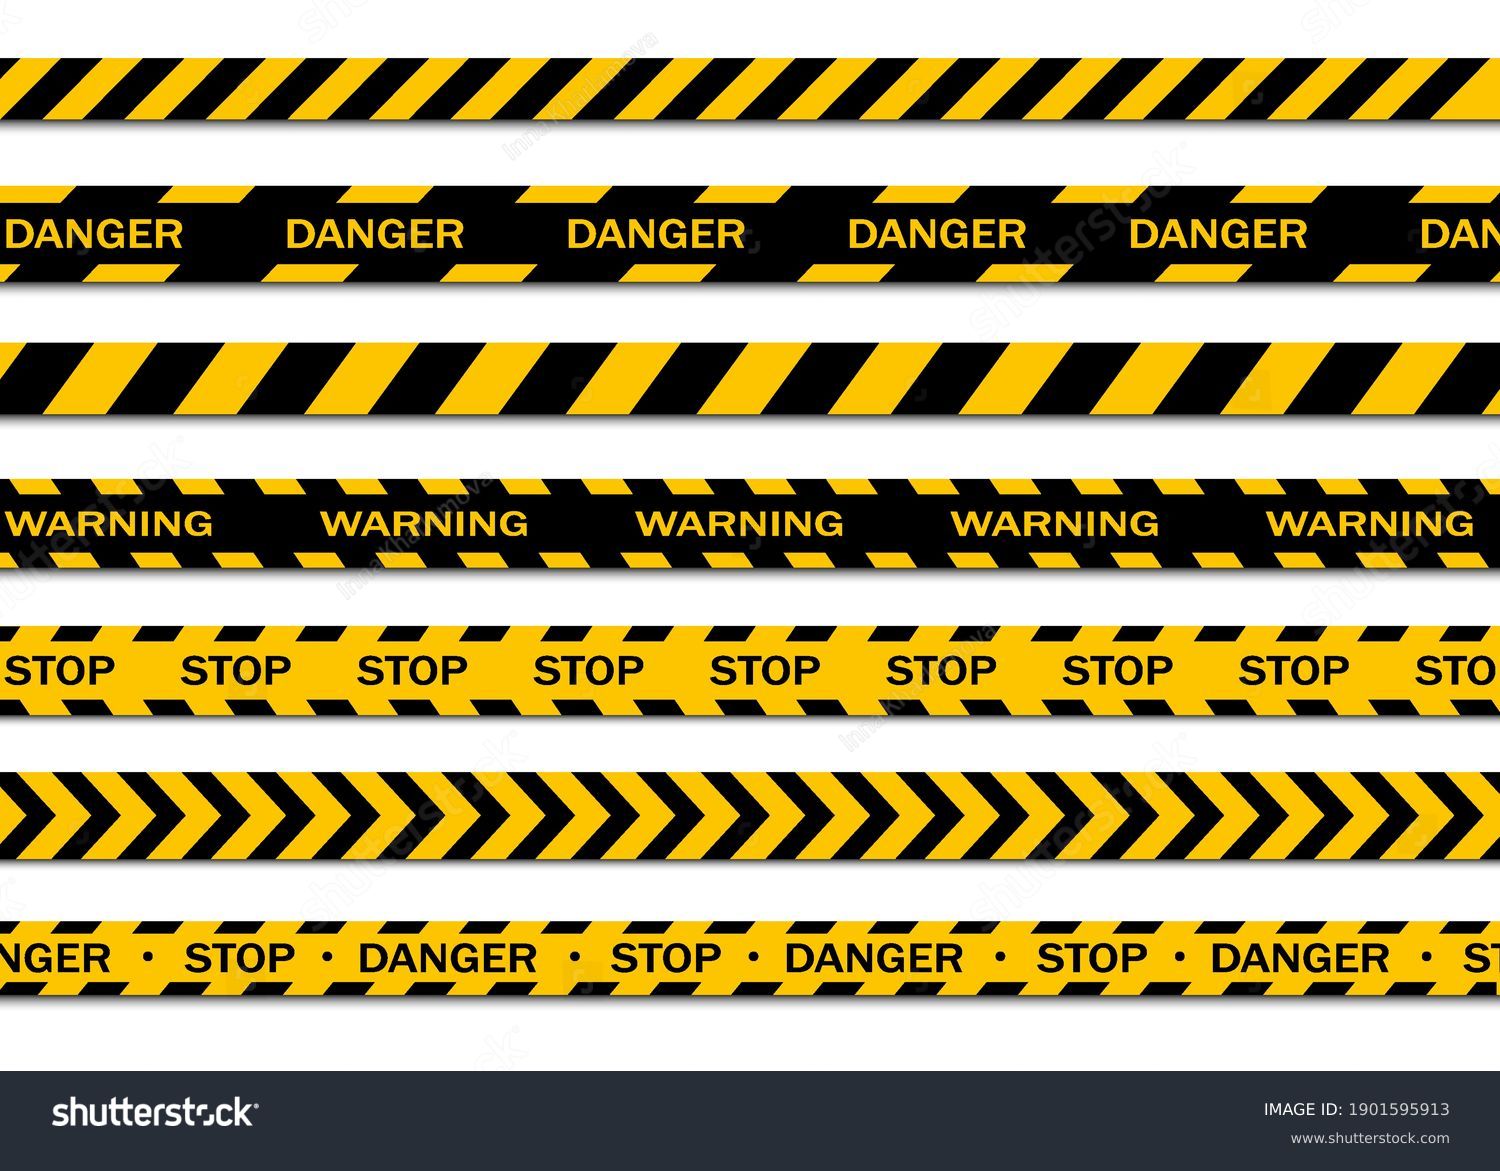 SVG of Set of warning tapes isolated on white background. Warning tape, danger tape, caution tape, under construction tape. Vector illustration svg